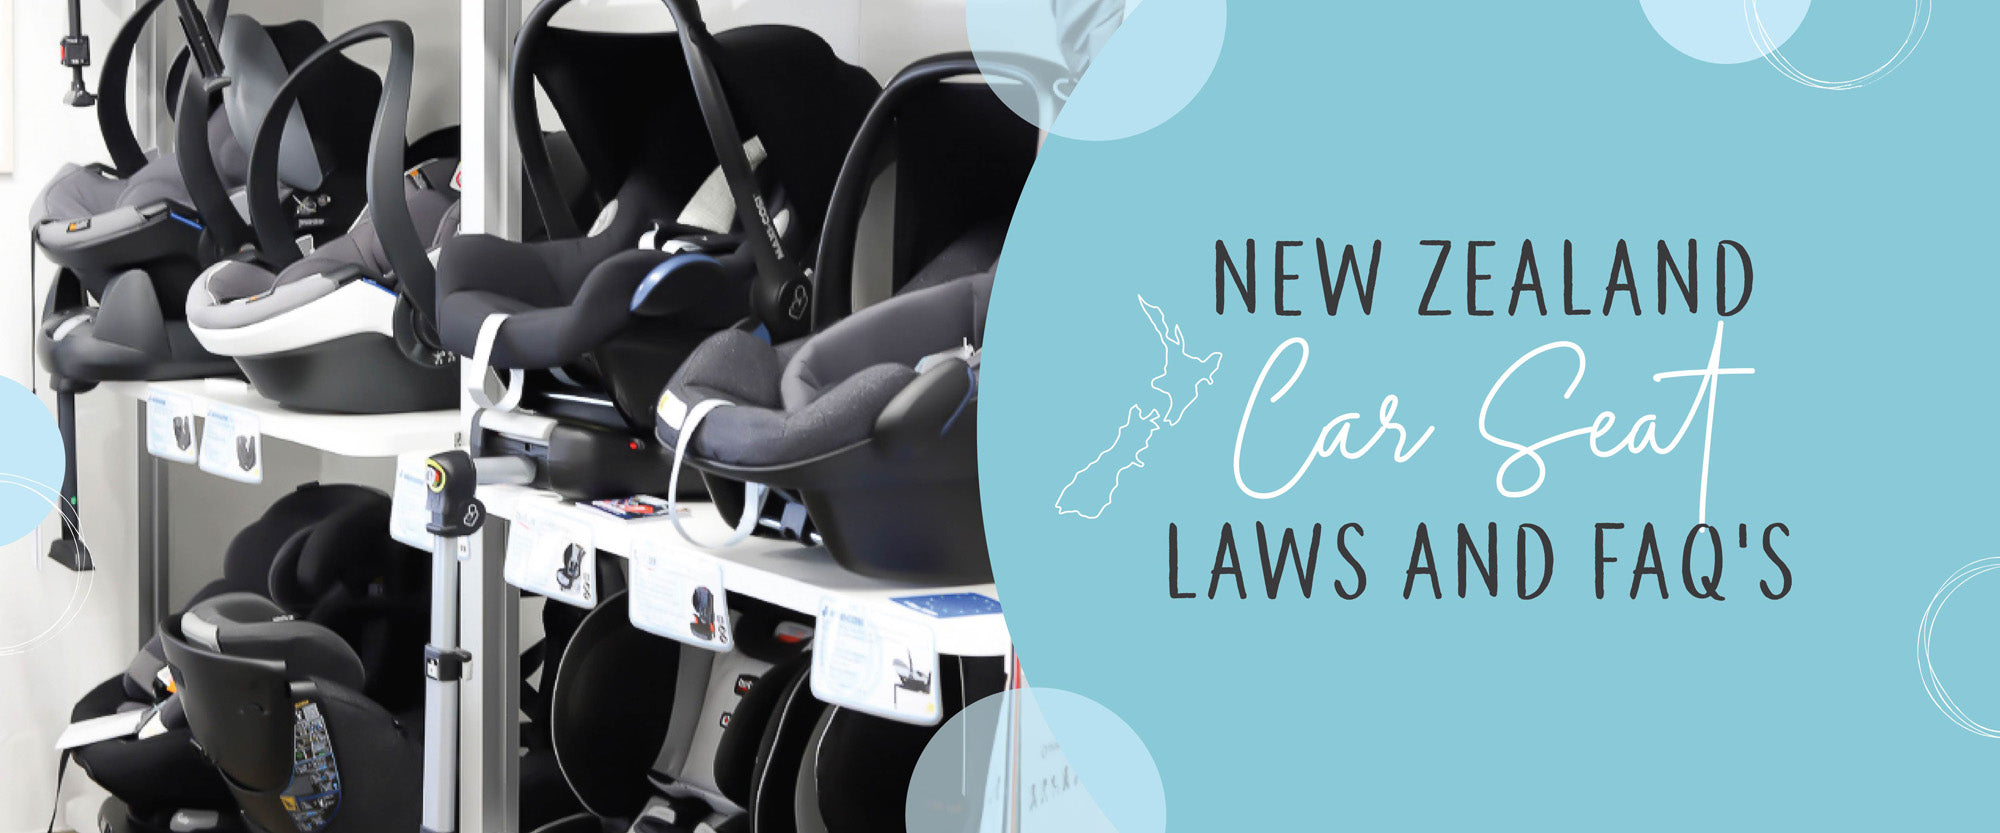 New Zealand Car Seat Laws and FAQ's